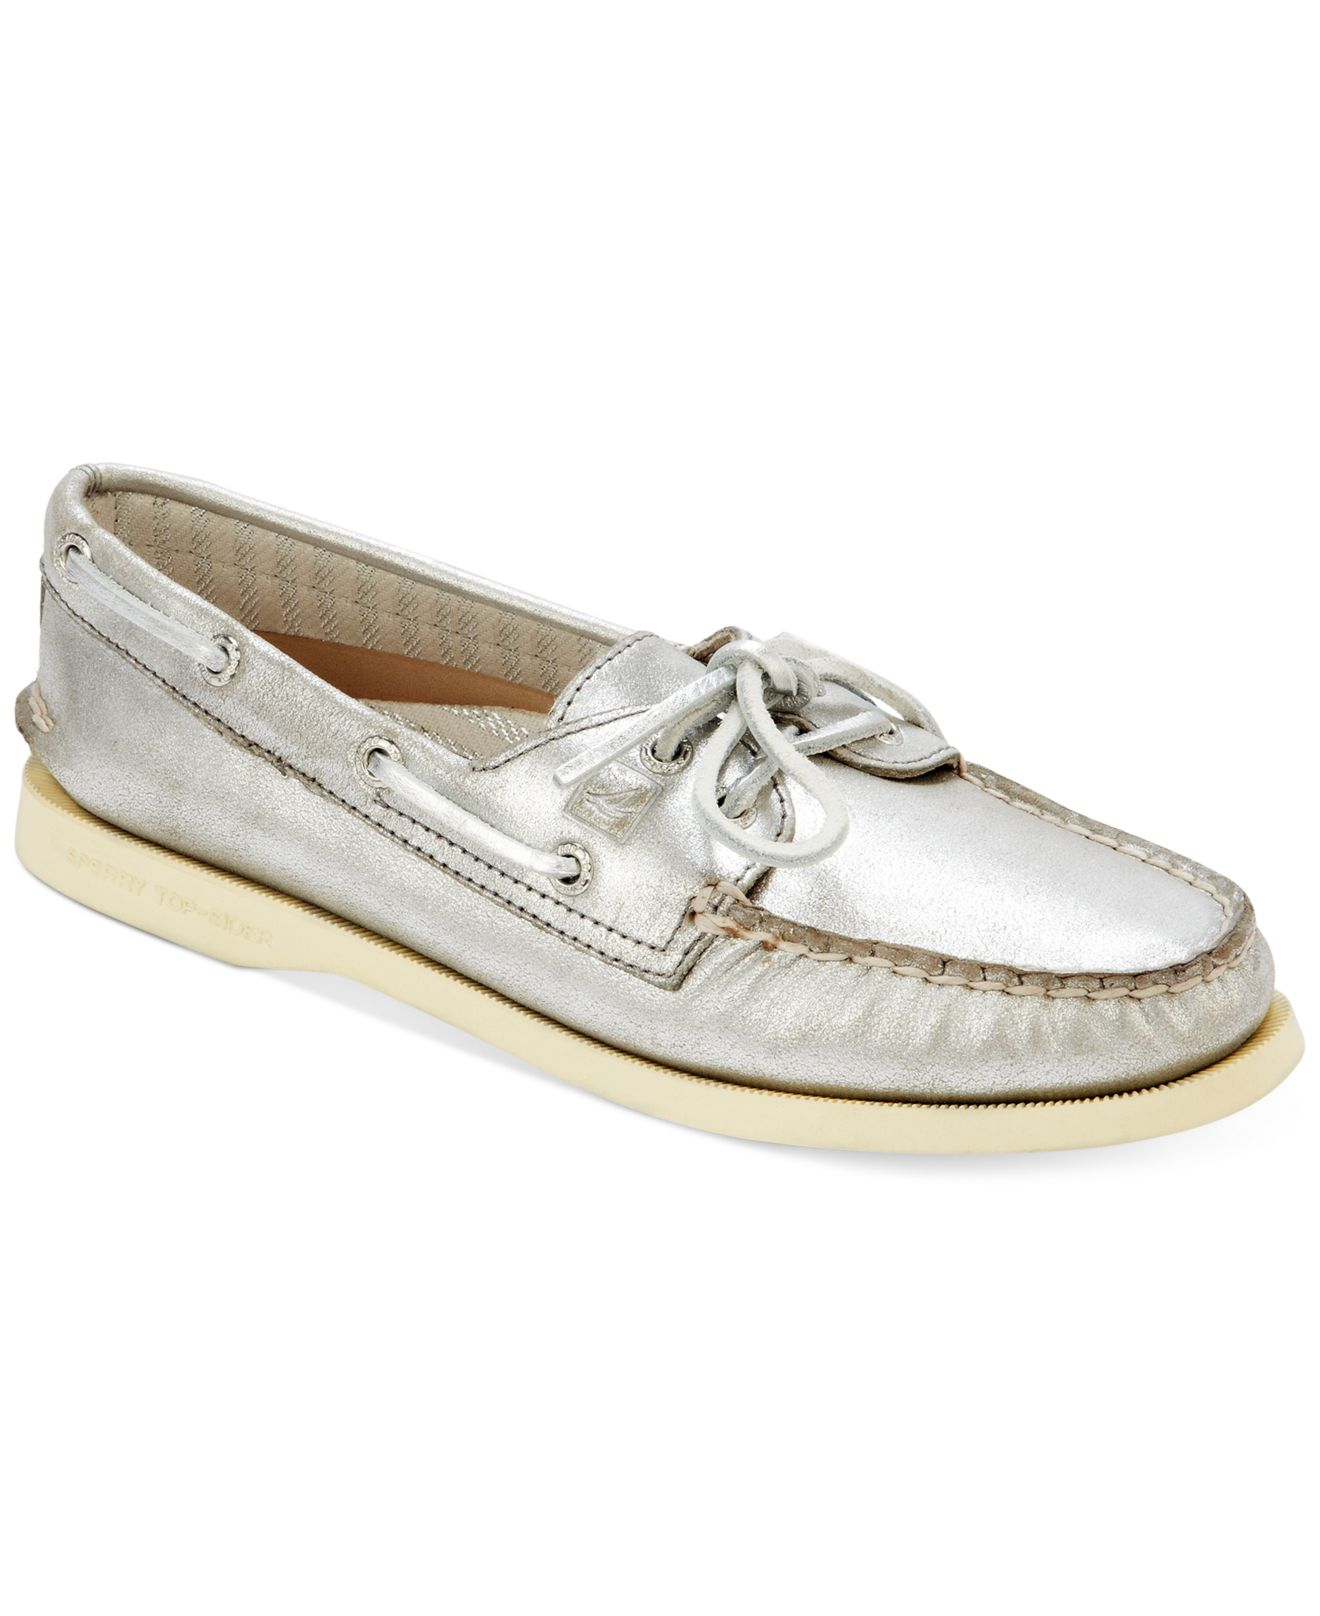 Sperry Top-Sider Womens O 2-Eye Metallic Boat Shoes 